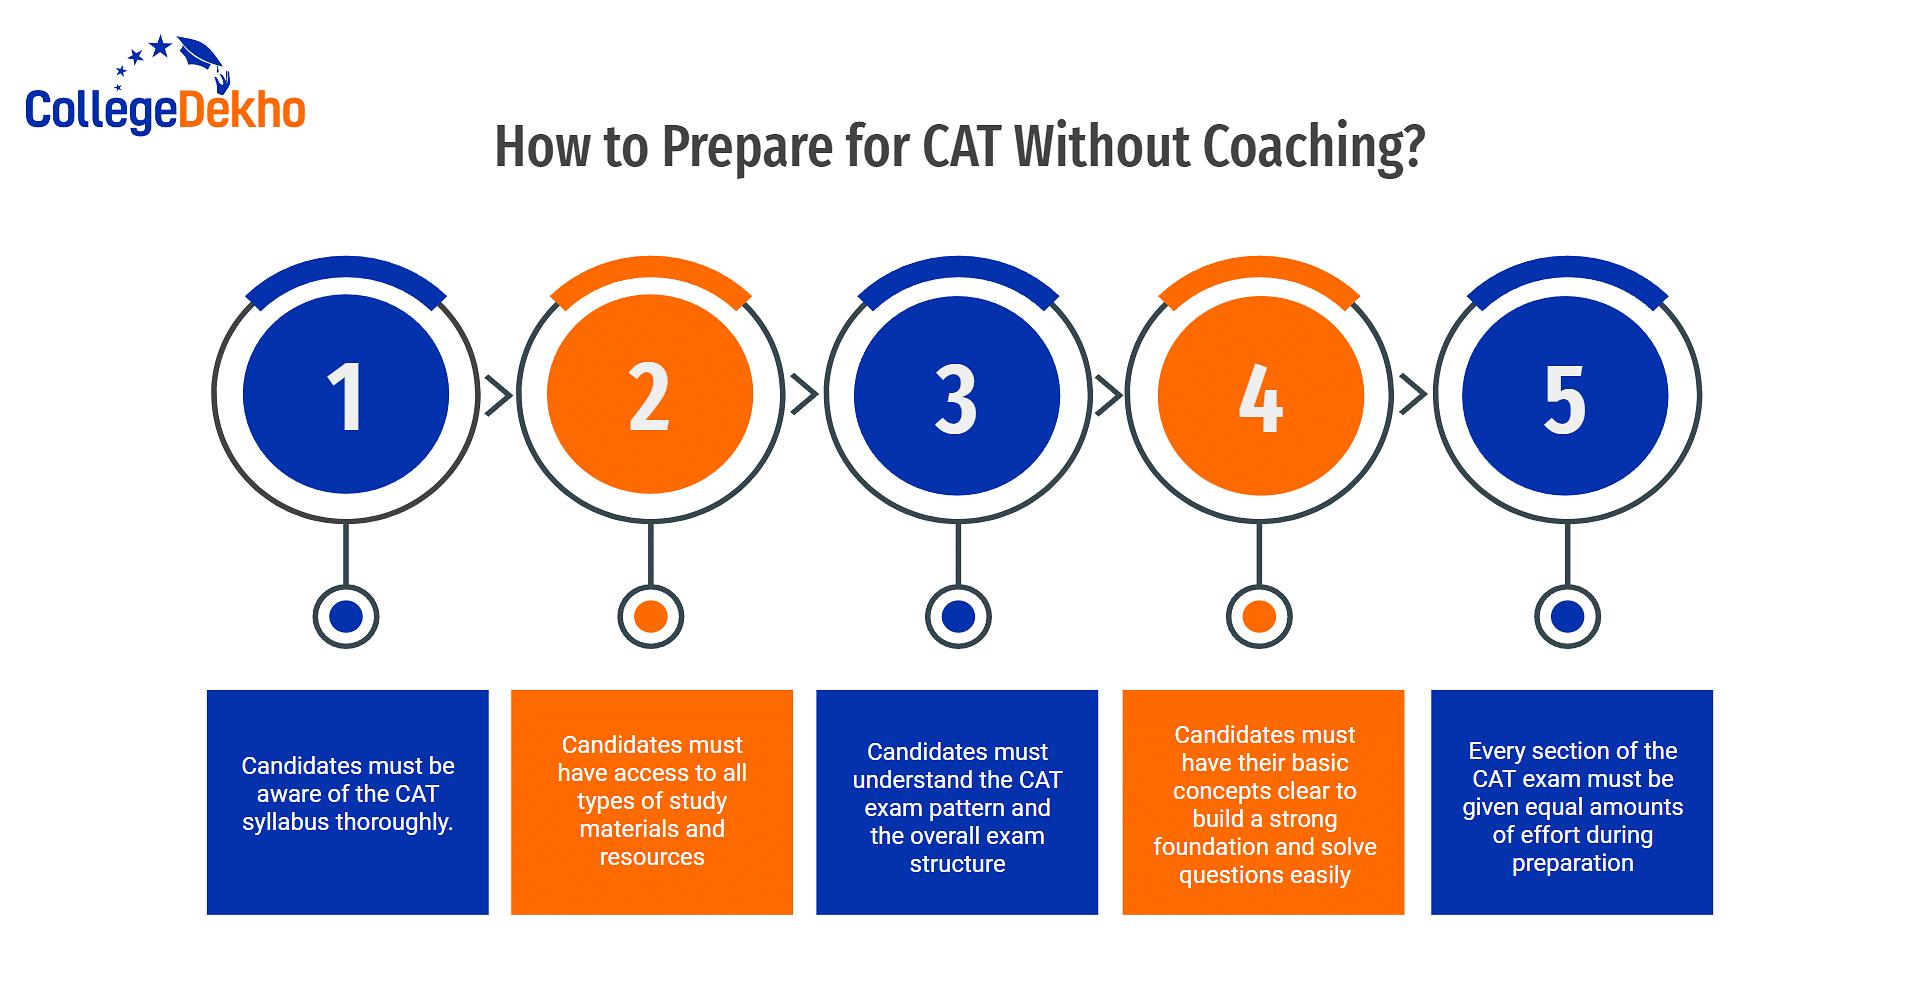 How to Prepare for CAT Without Coaching?